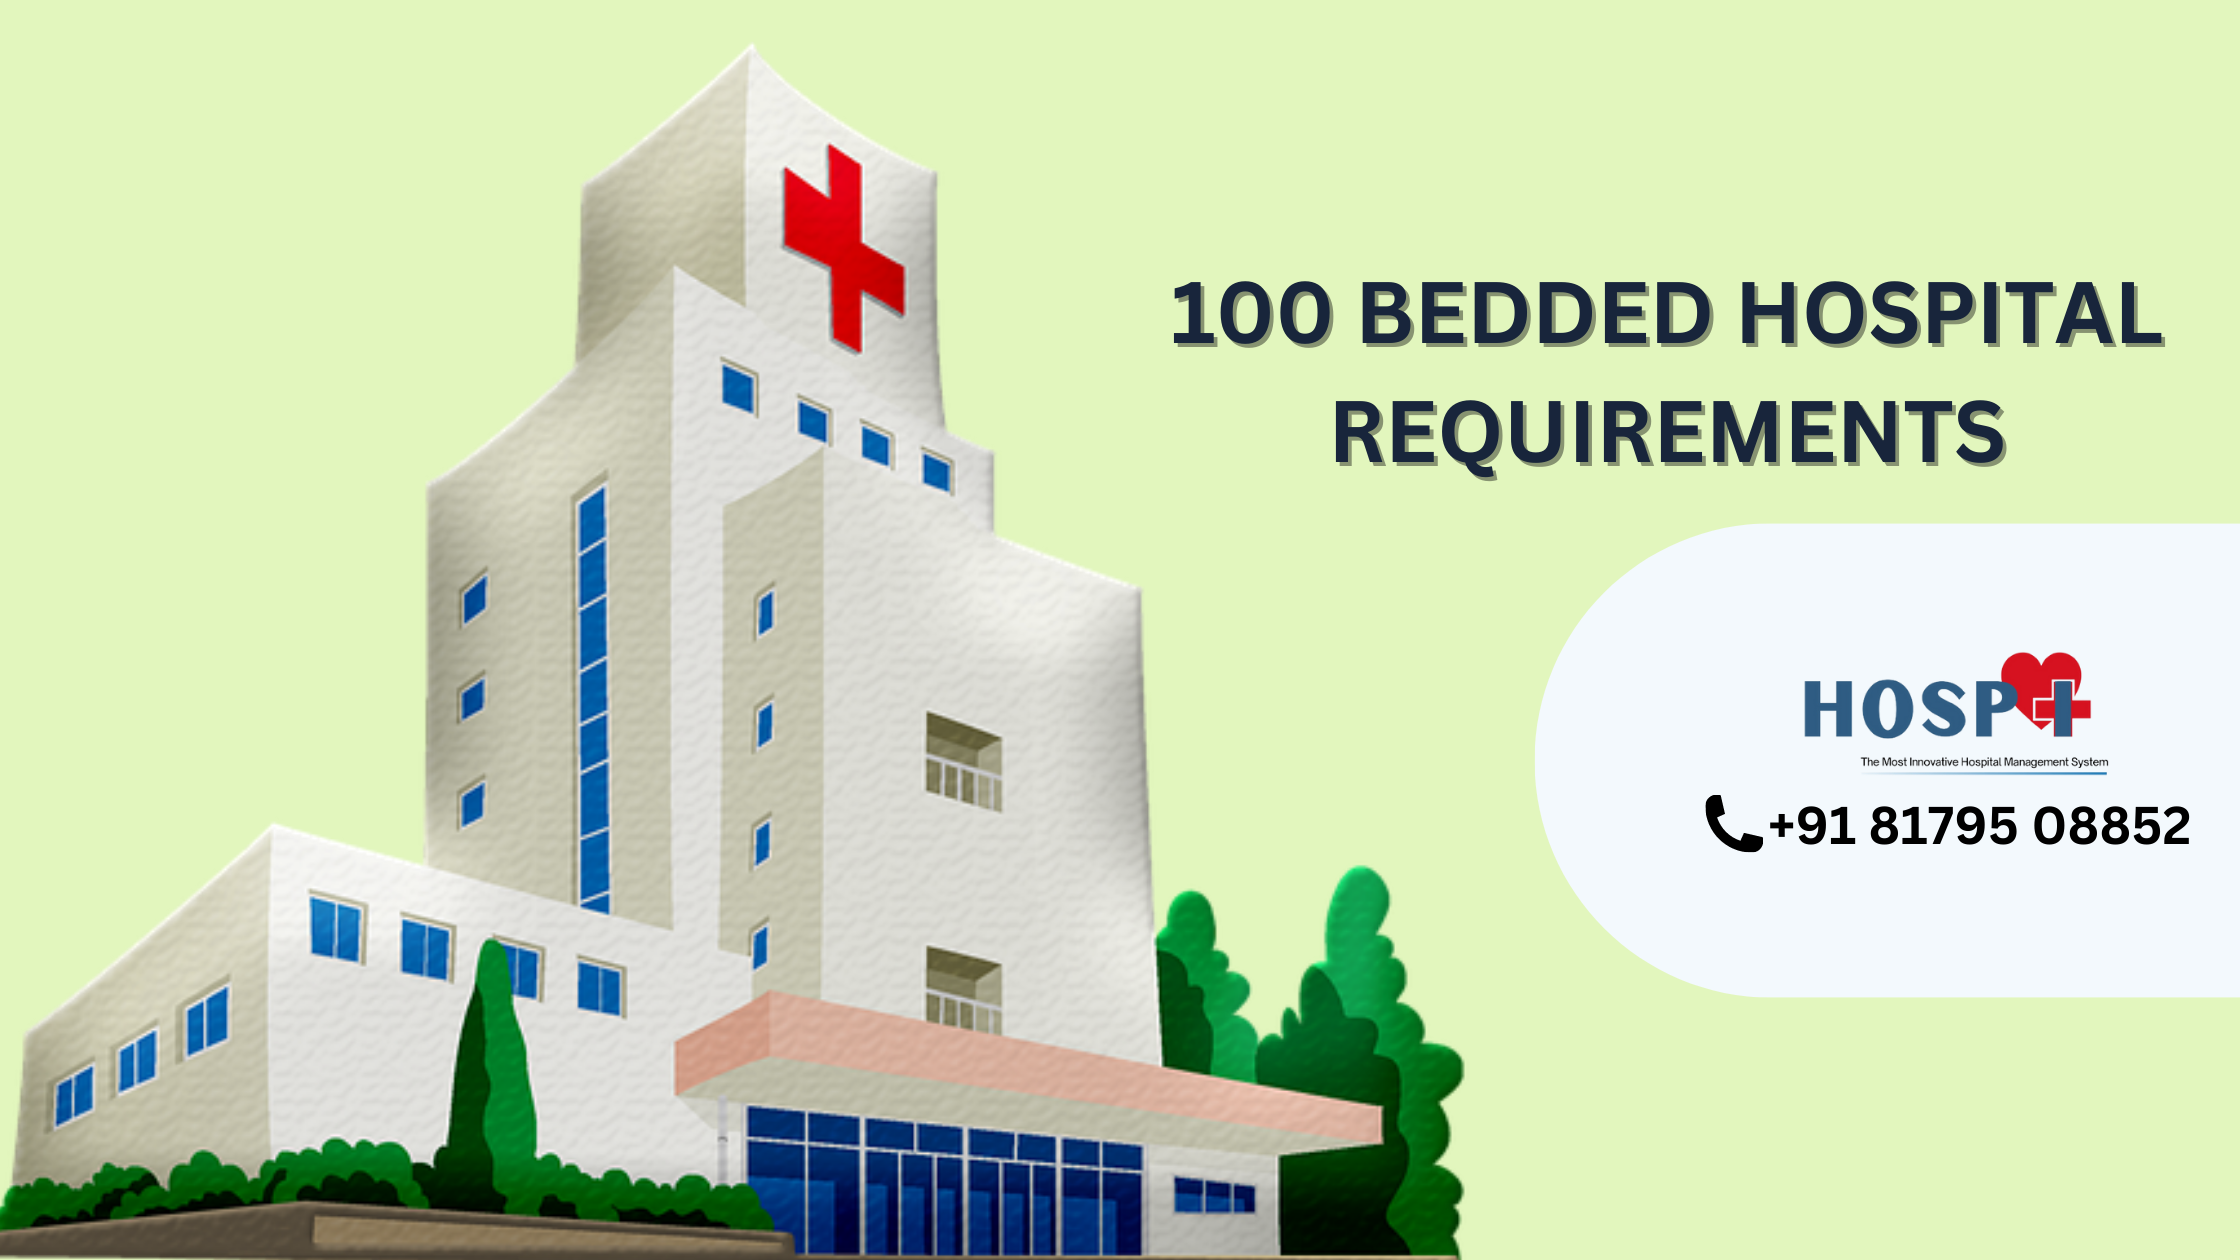 100 Bedded Hospital Requirements